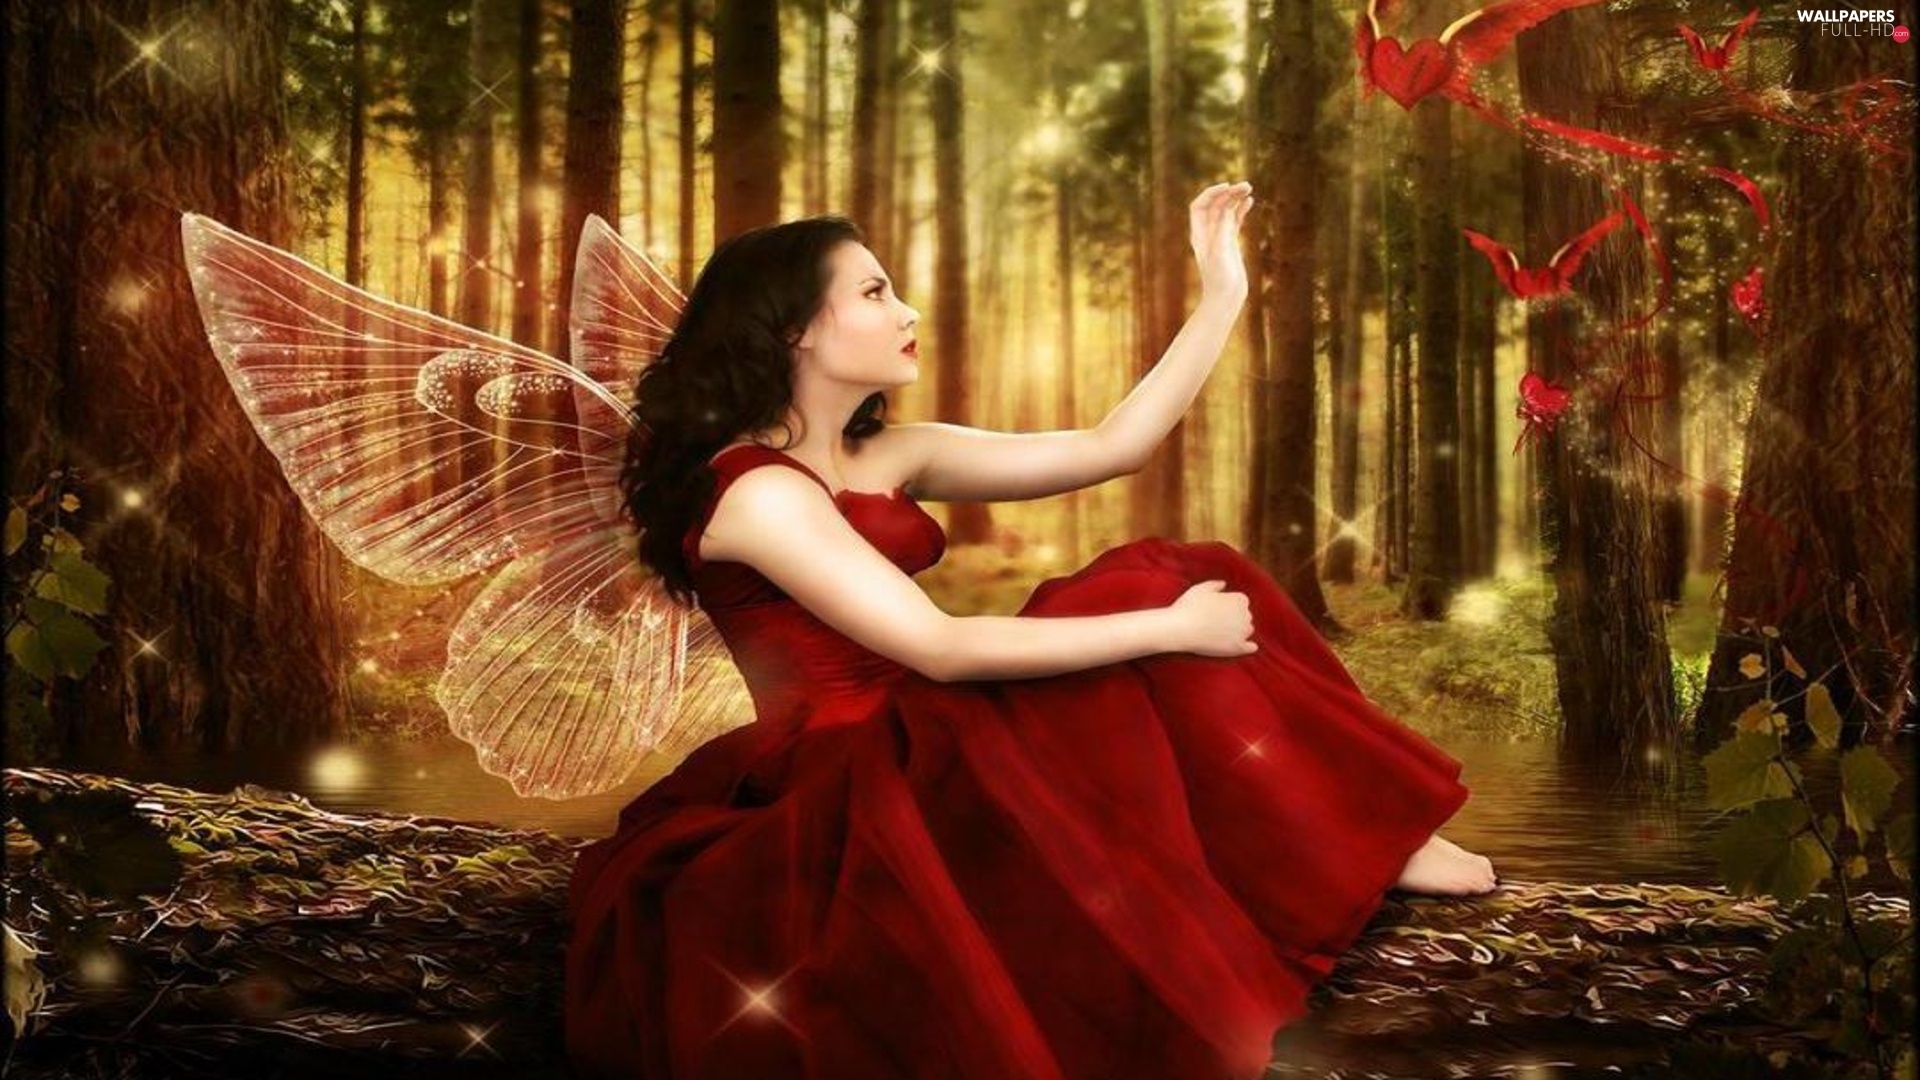 Butterfly, Forest, Girl - Magical Girl In Forest - HD Wallpaper 